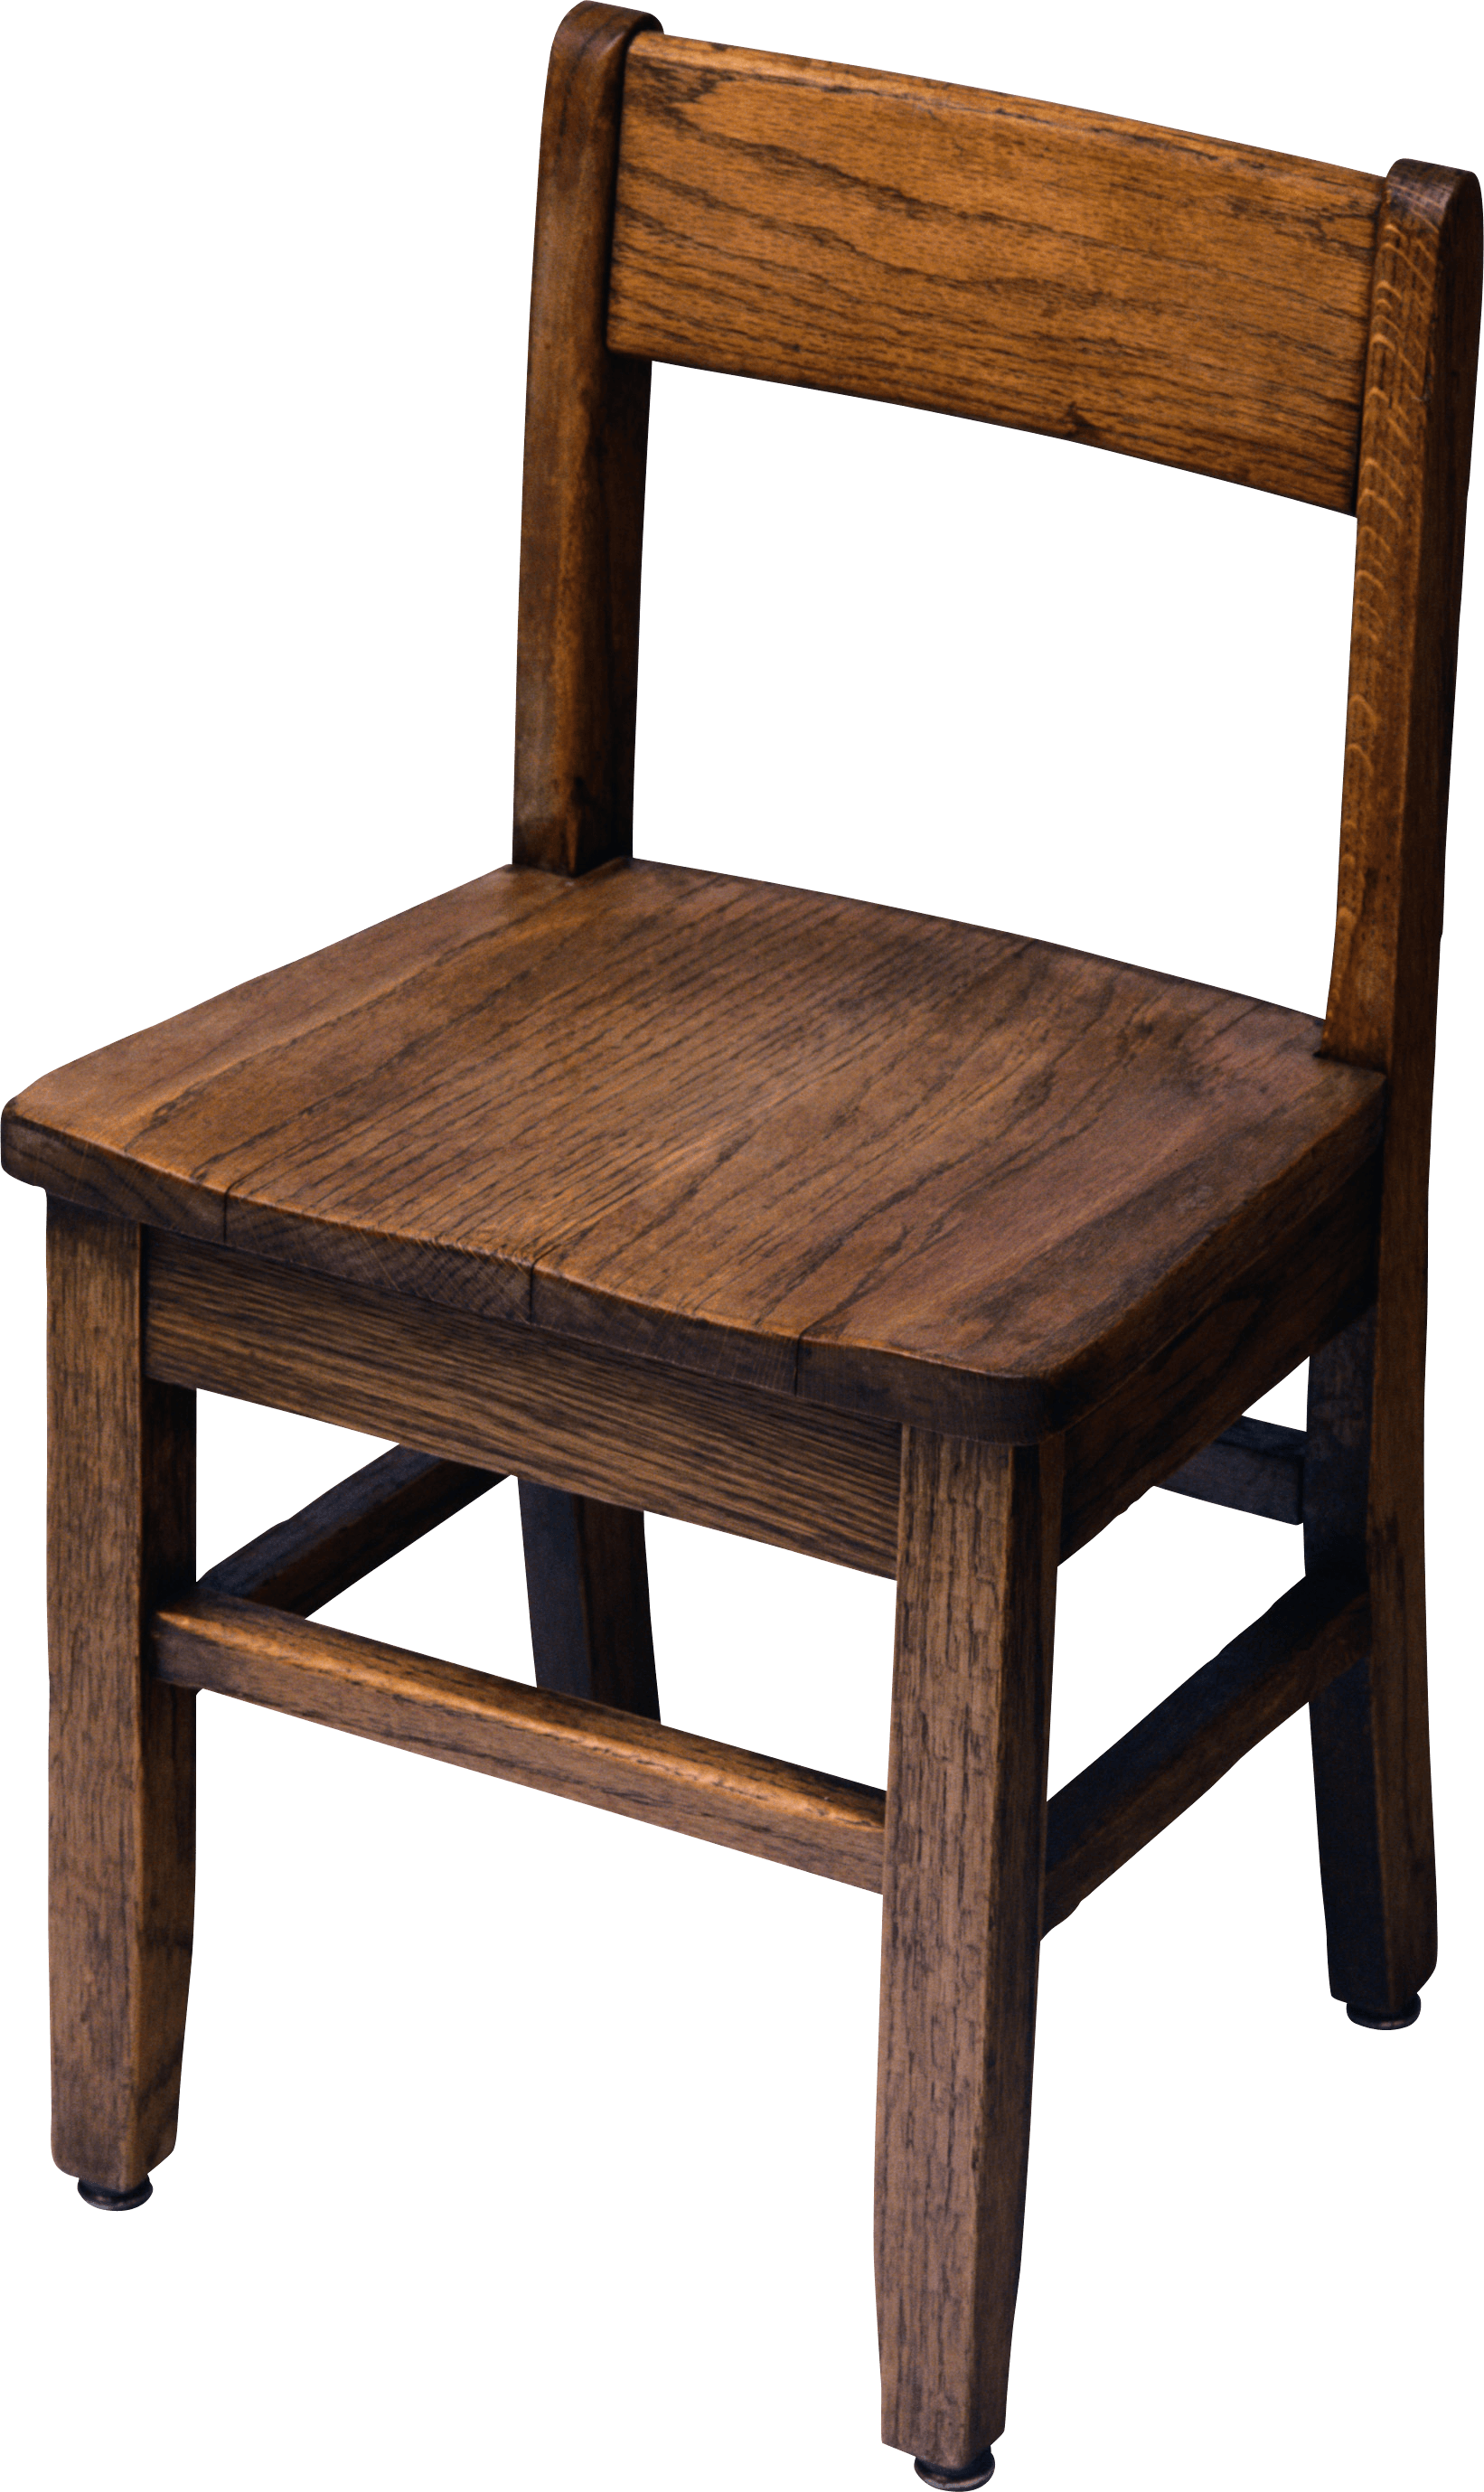 Download PNG image - Wooden Antique Chair Transparent Background 